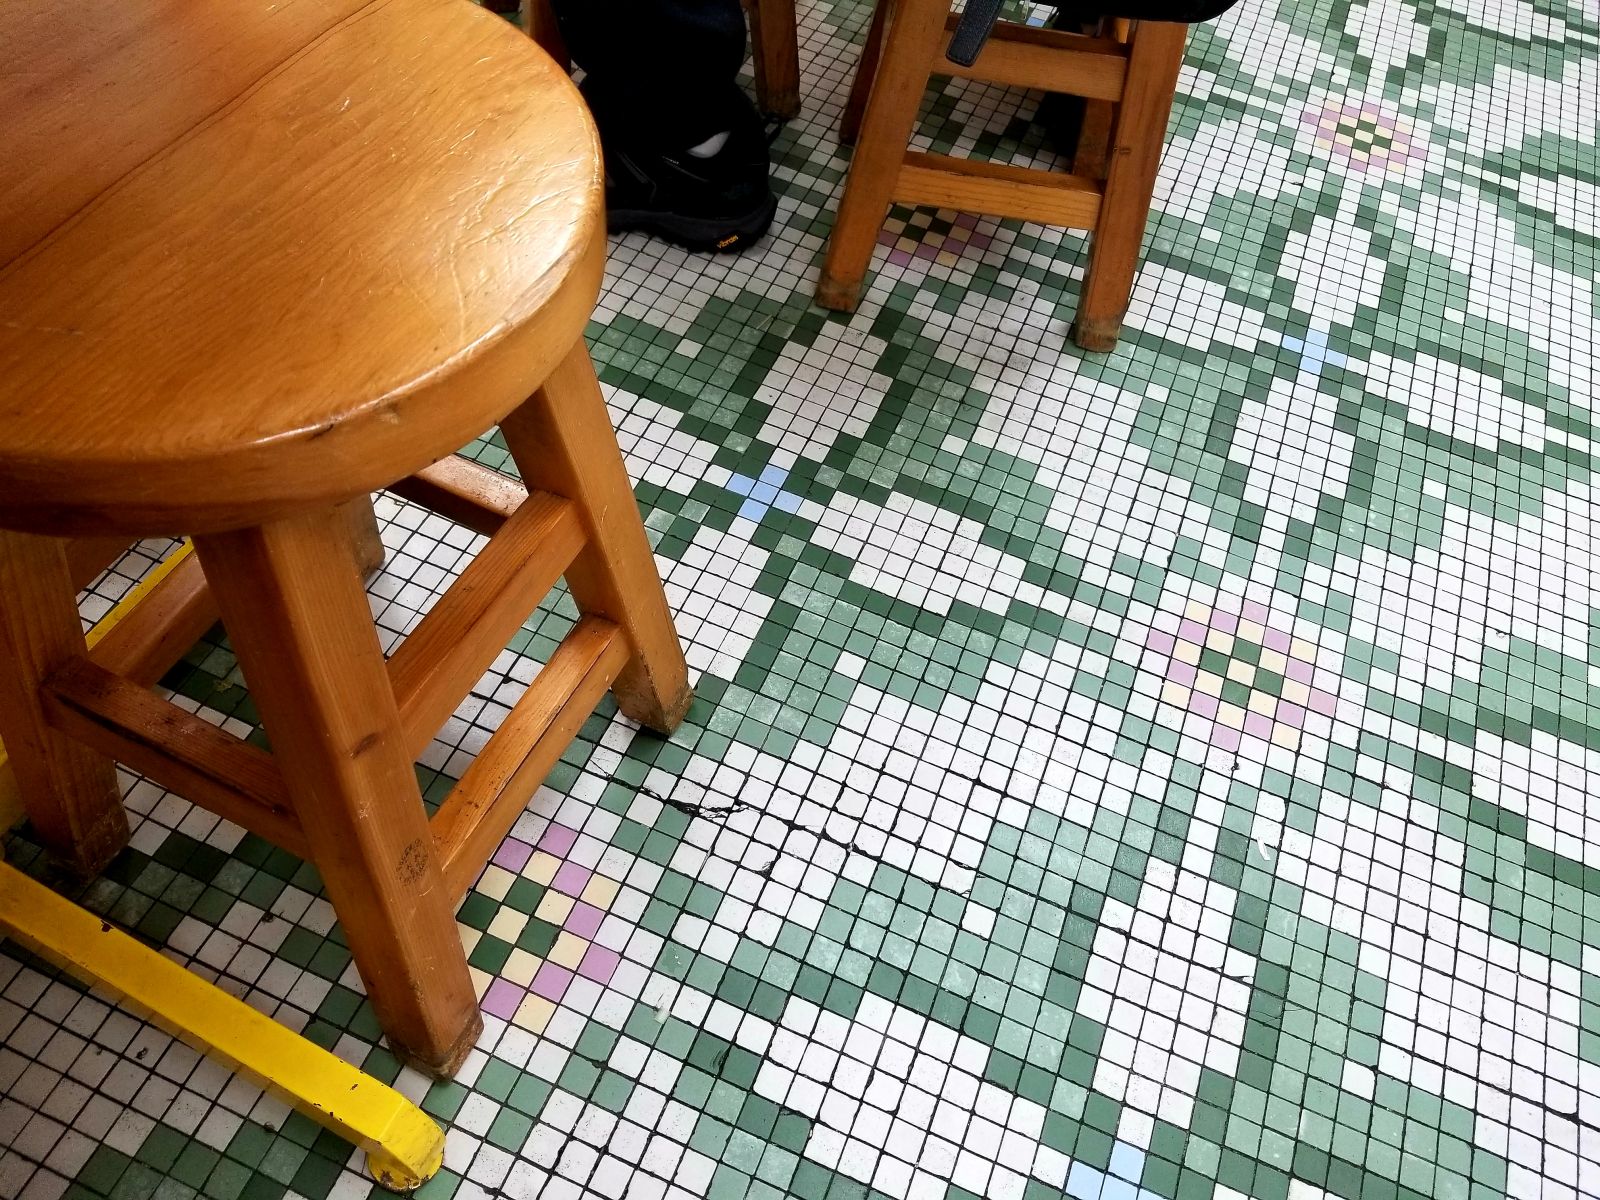 These unique tiles add to the authentic atmosphere of the restaurant.